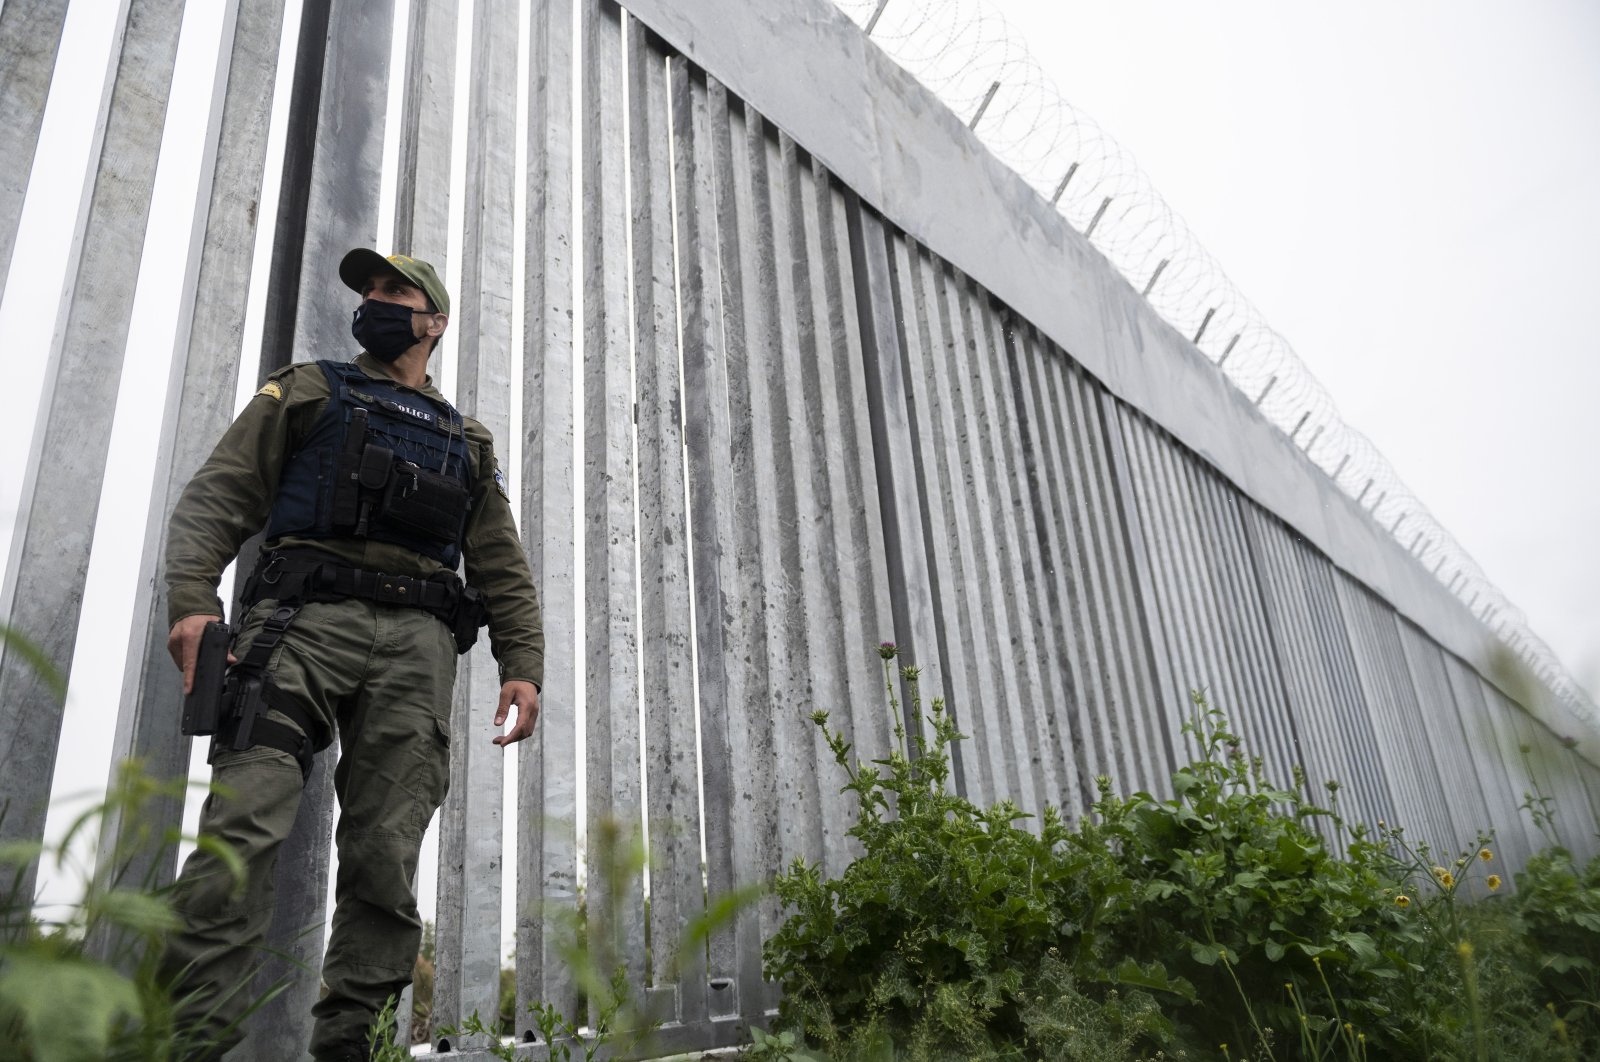 A police officer patrols alongside a steel wall at Evros River, near the village of Poros, Greece, May 21, 2021. (AP Photo)